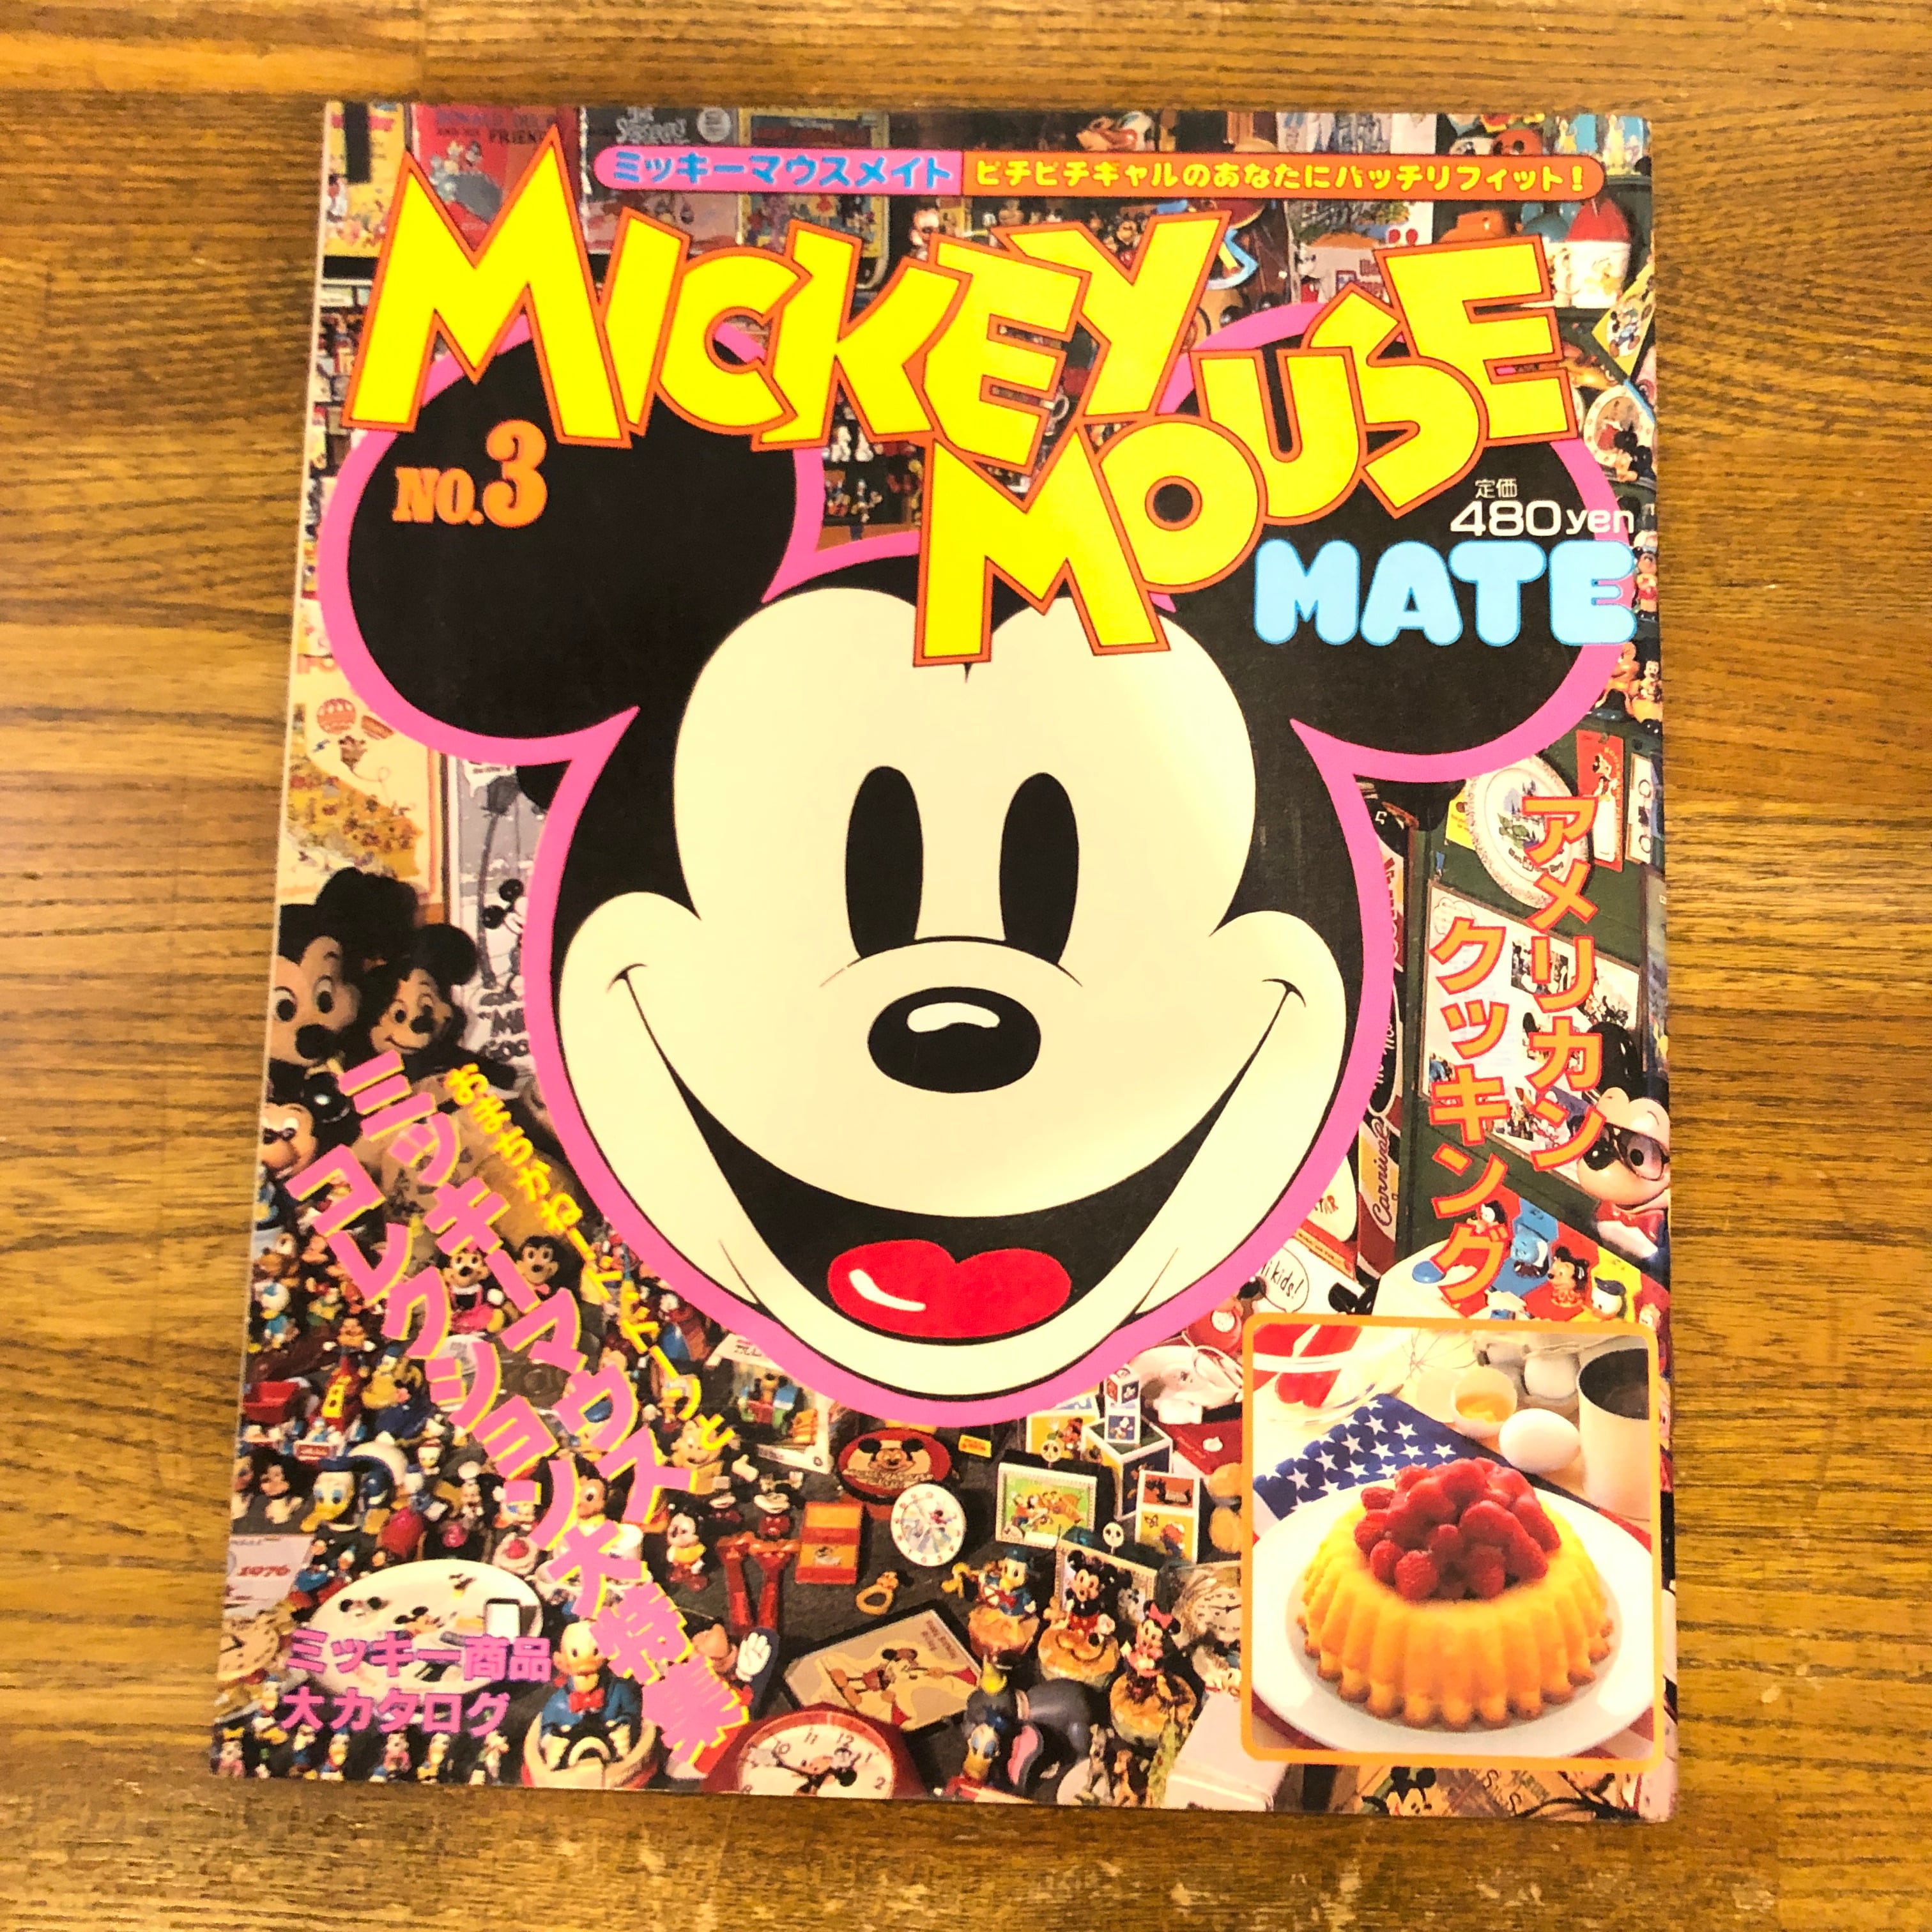 MICKEY MOUSE MATE ミッキーマウスメイト [3冊セット]